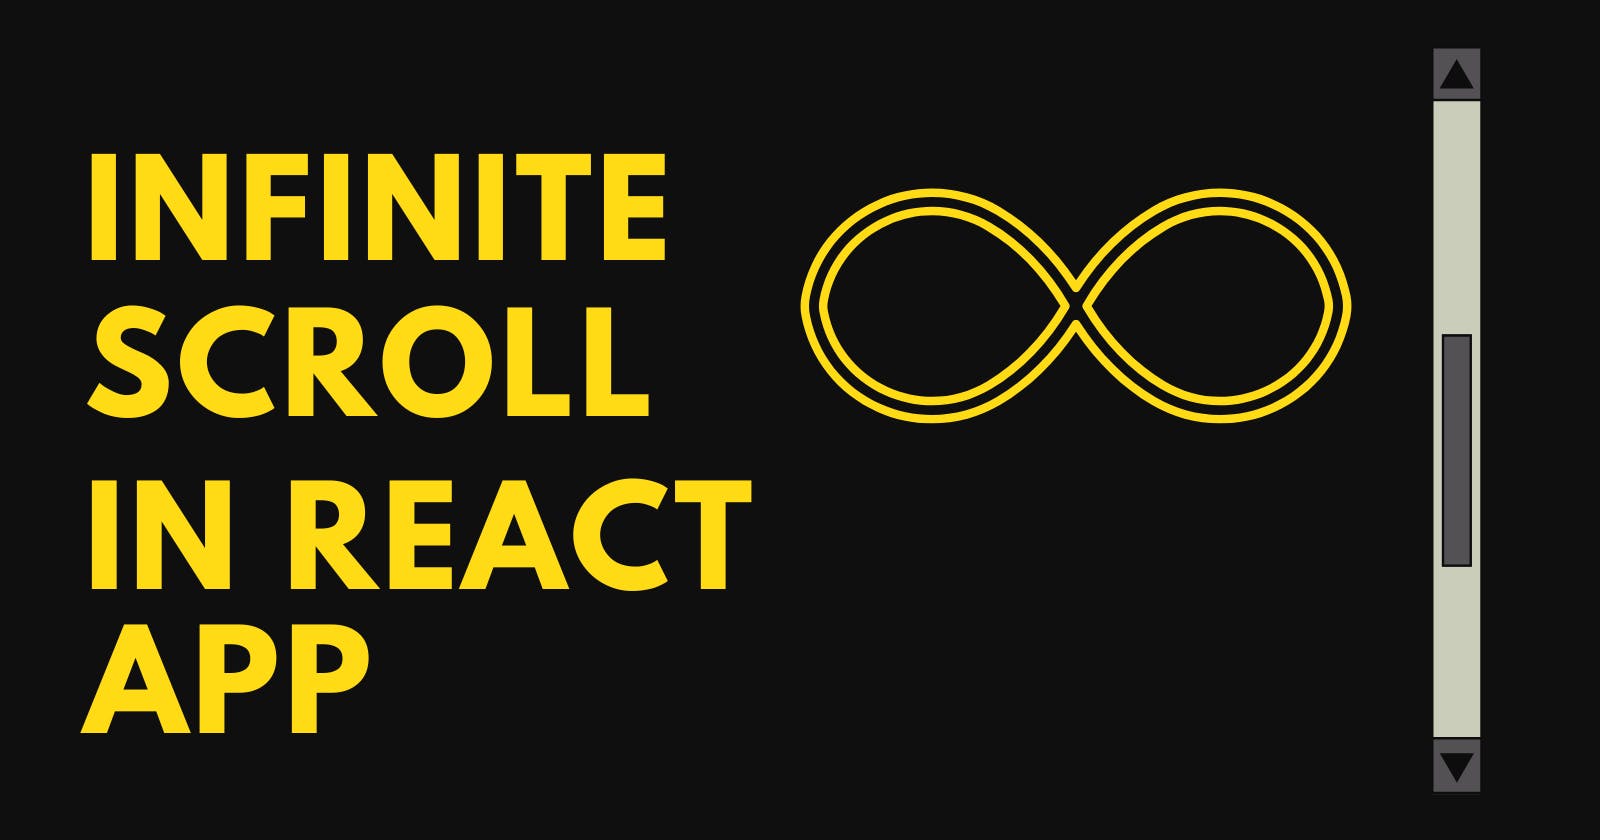 Implementing Infinite Scroll in a React Application